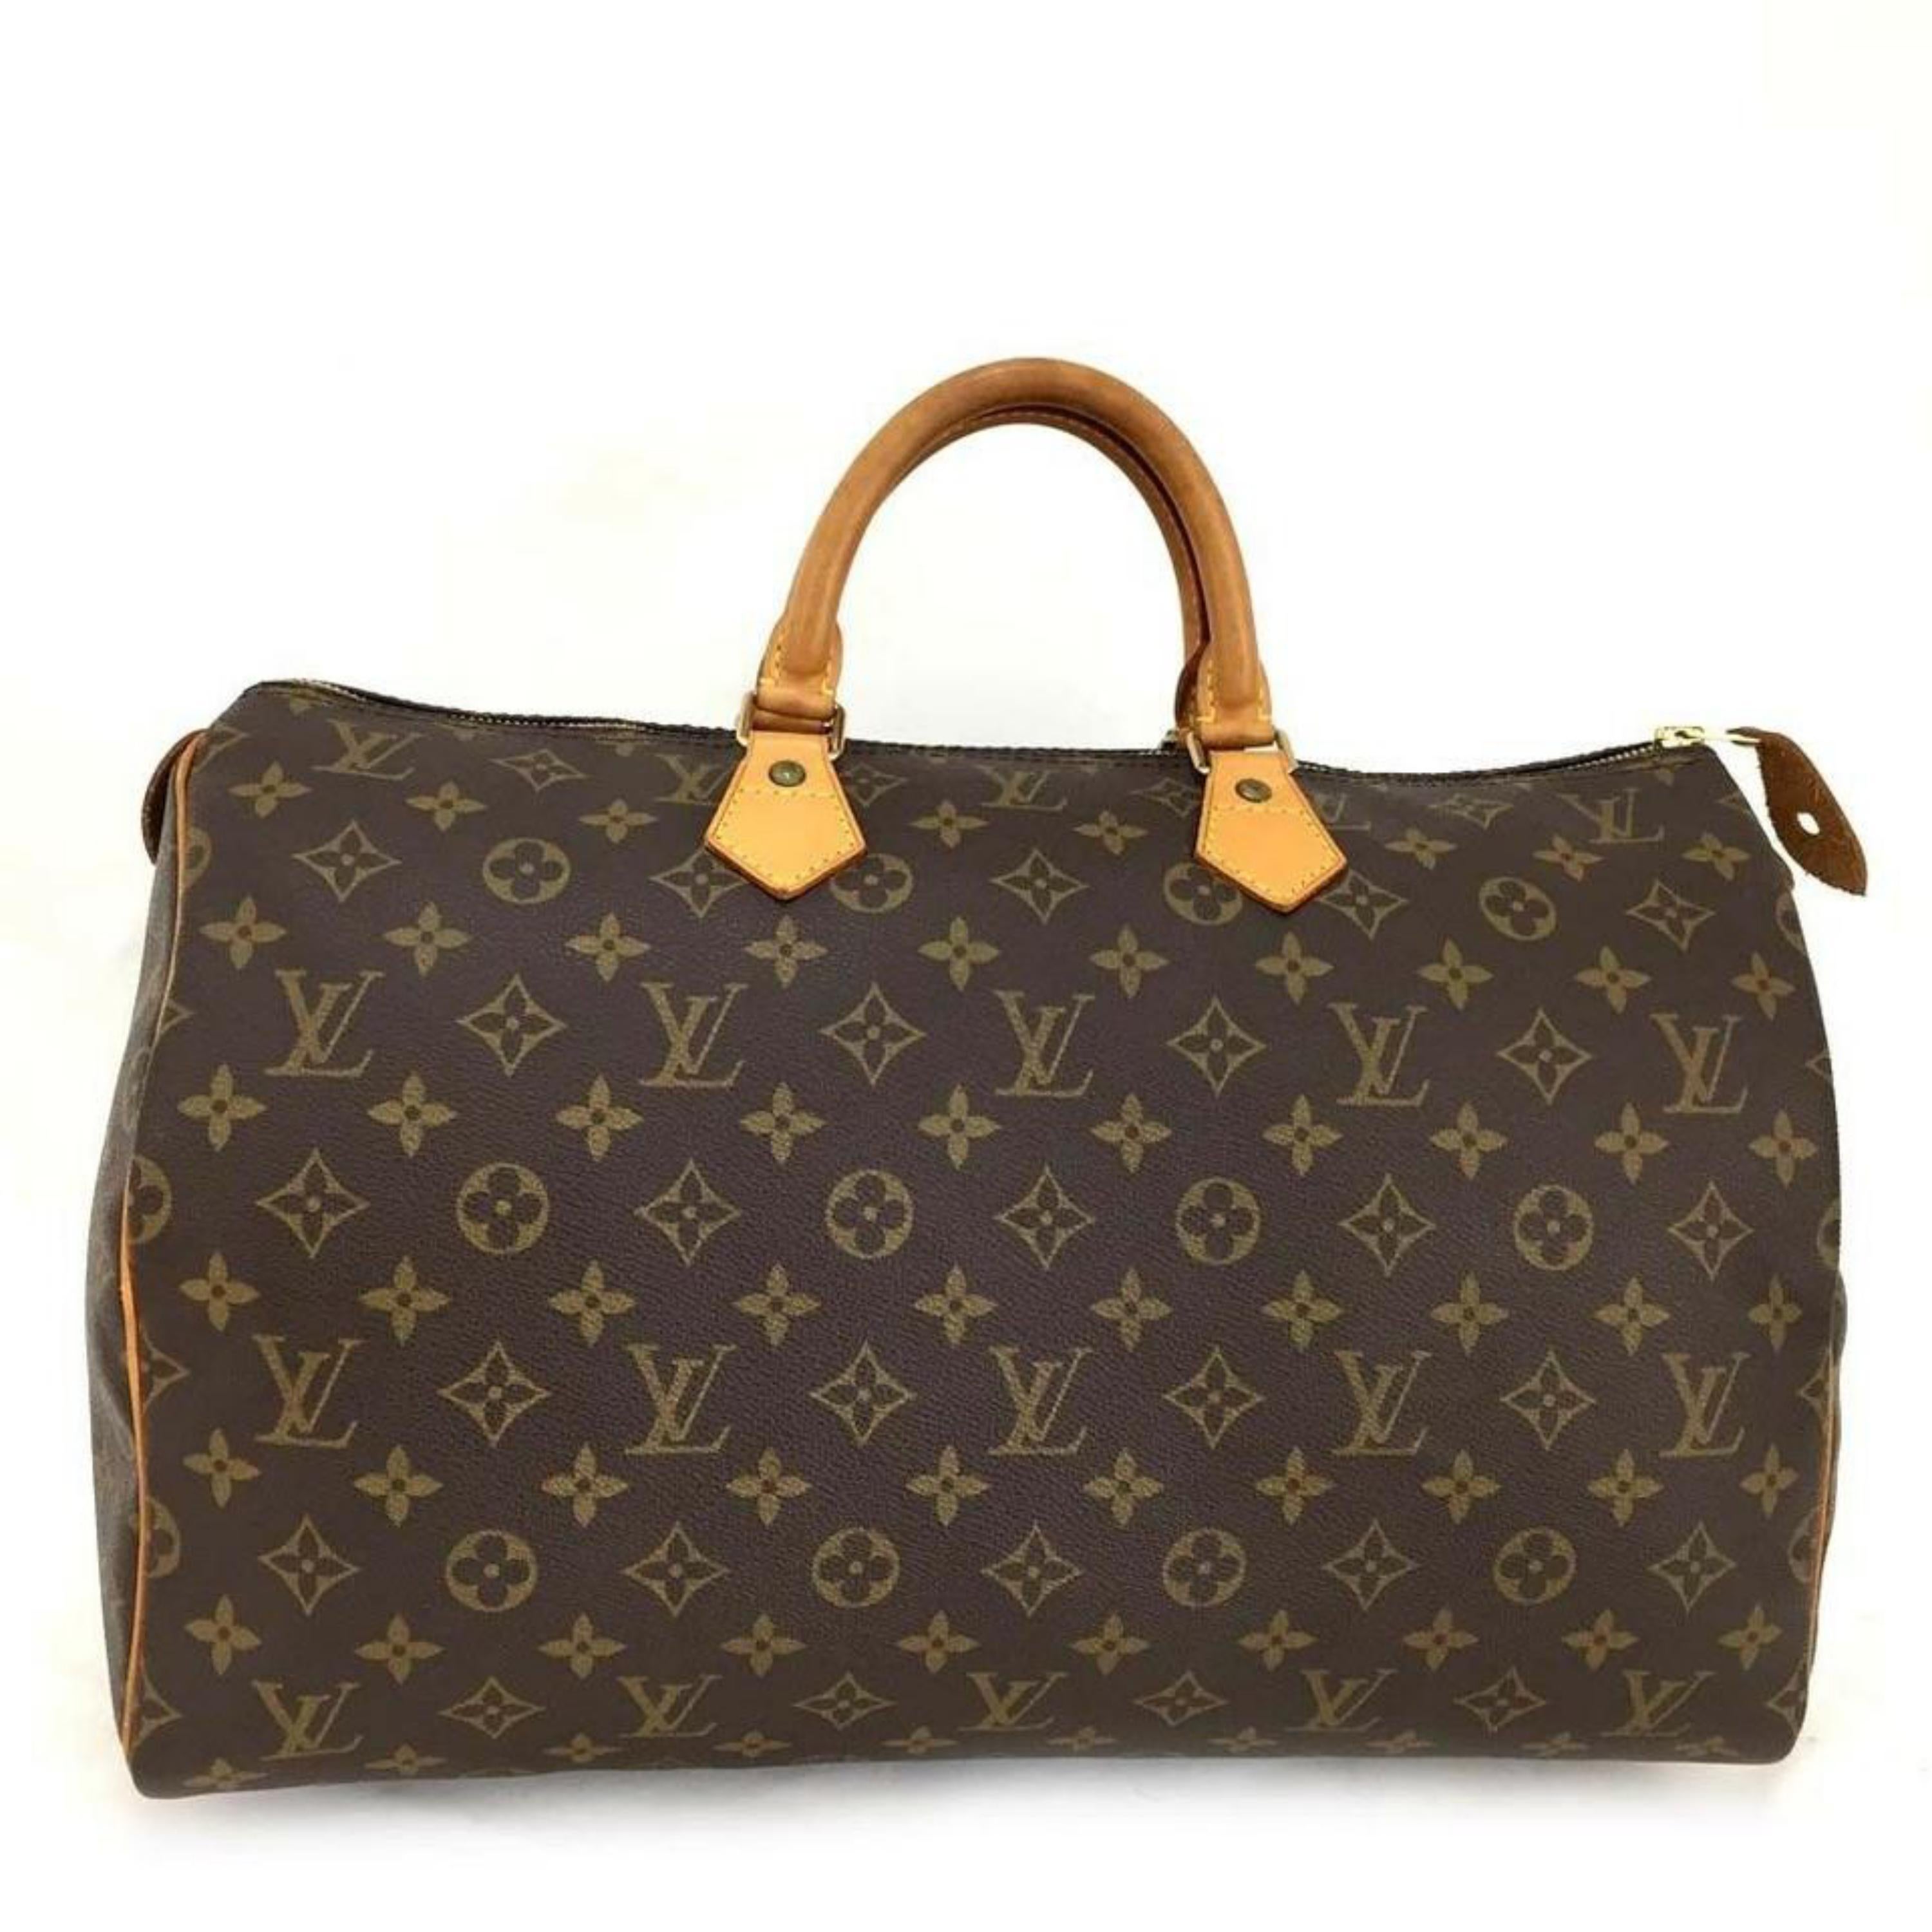 Louis Vuitton Speedy 40 Boston Gm 870010 Brown Coated Canvas Weekend/Travel Bag For Sale 1